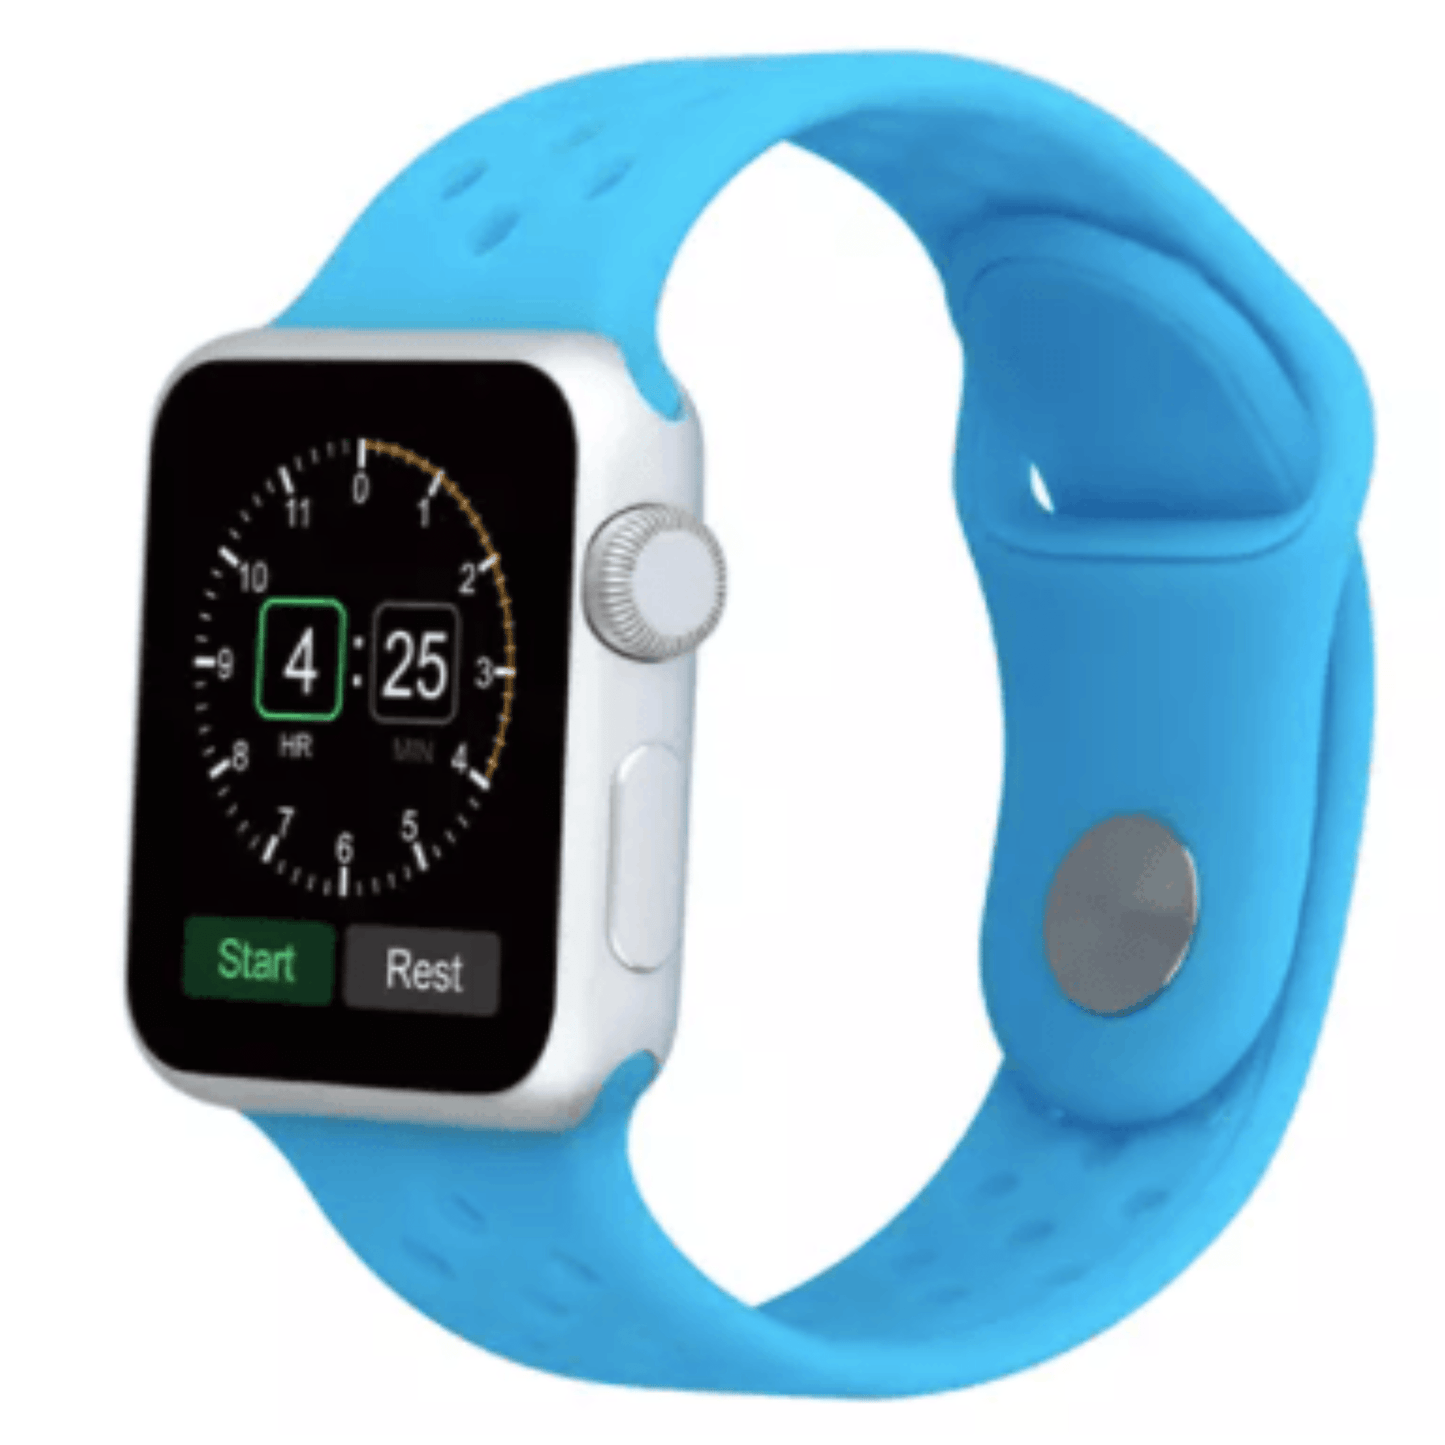 Breathable Silicone Sport Replacement Band for Apple Watch Blue Apple Watch Band Elements Watches